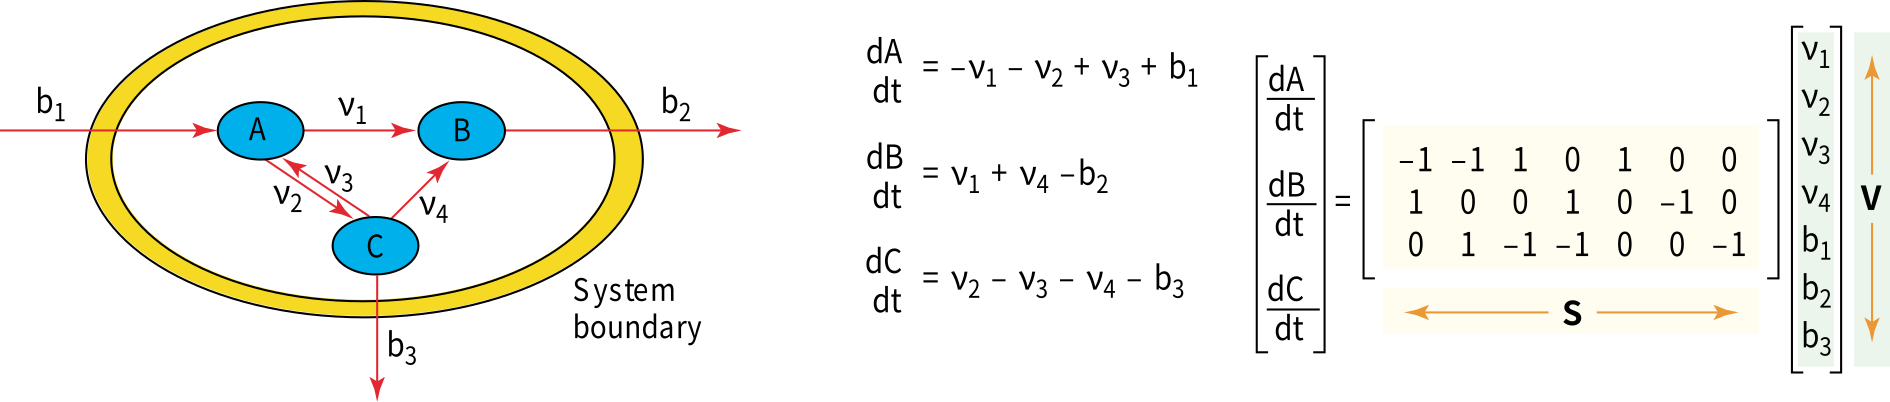 A simple model system and corresponding mass balance equations